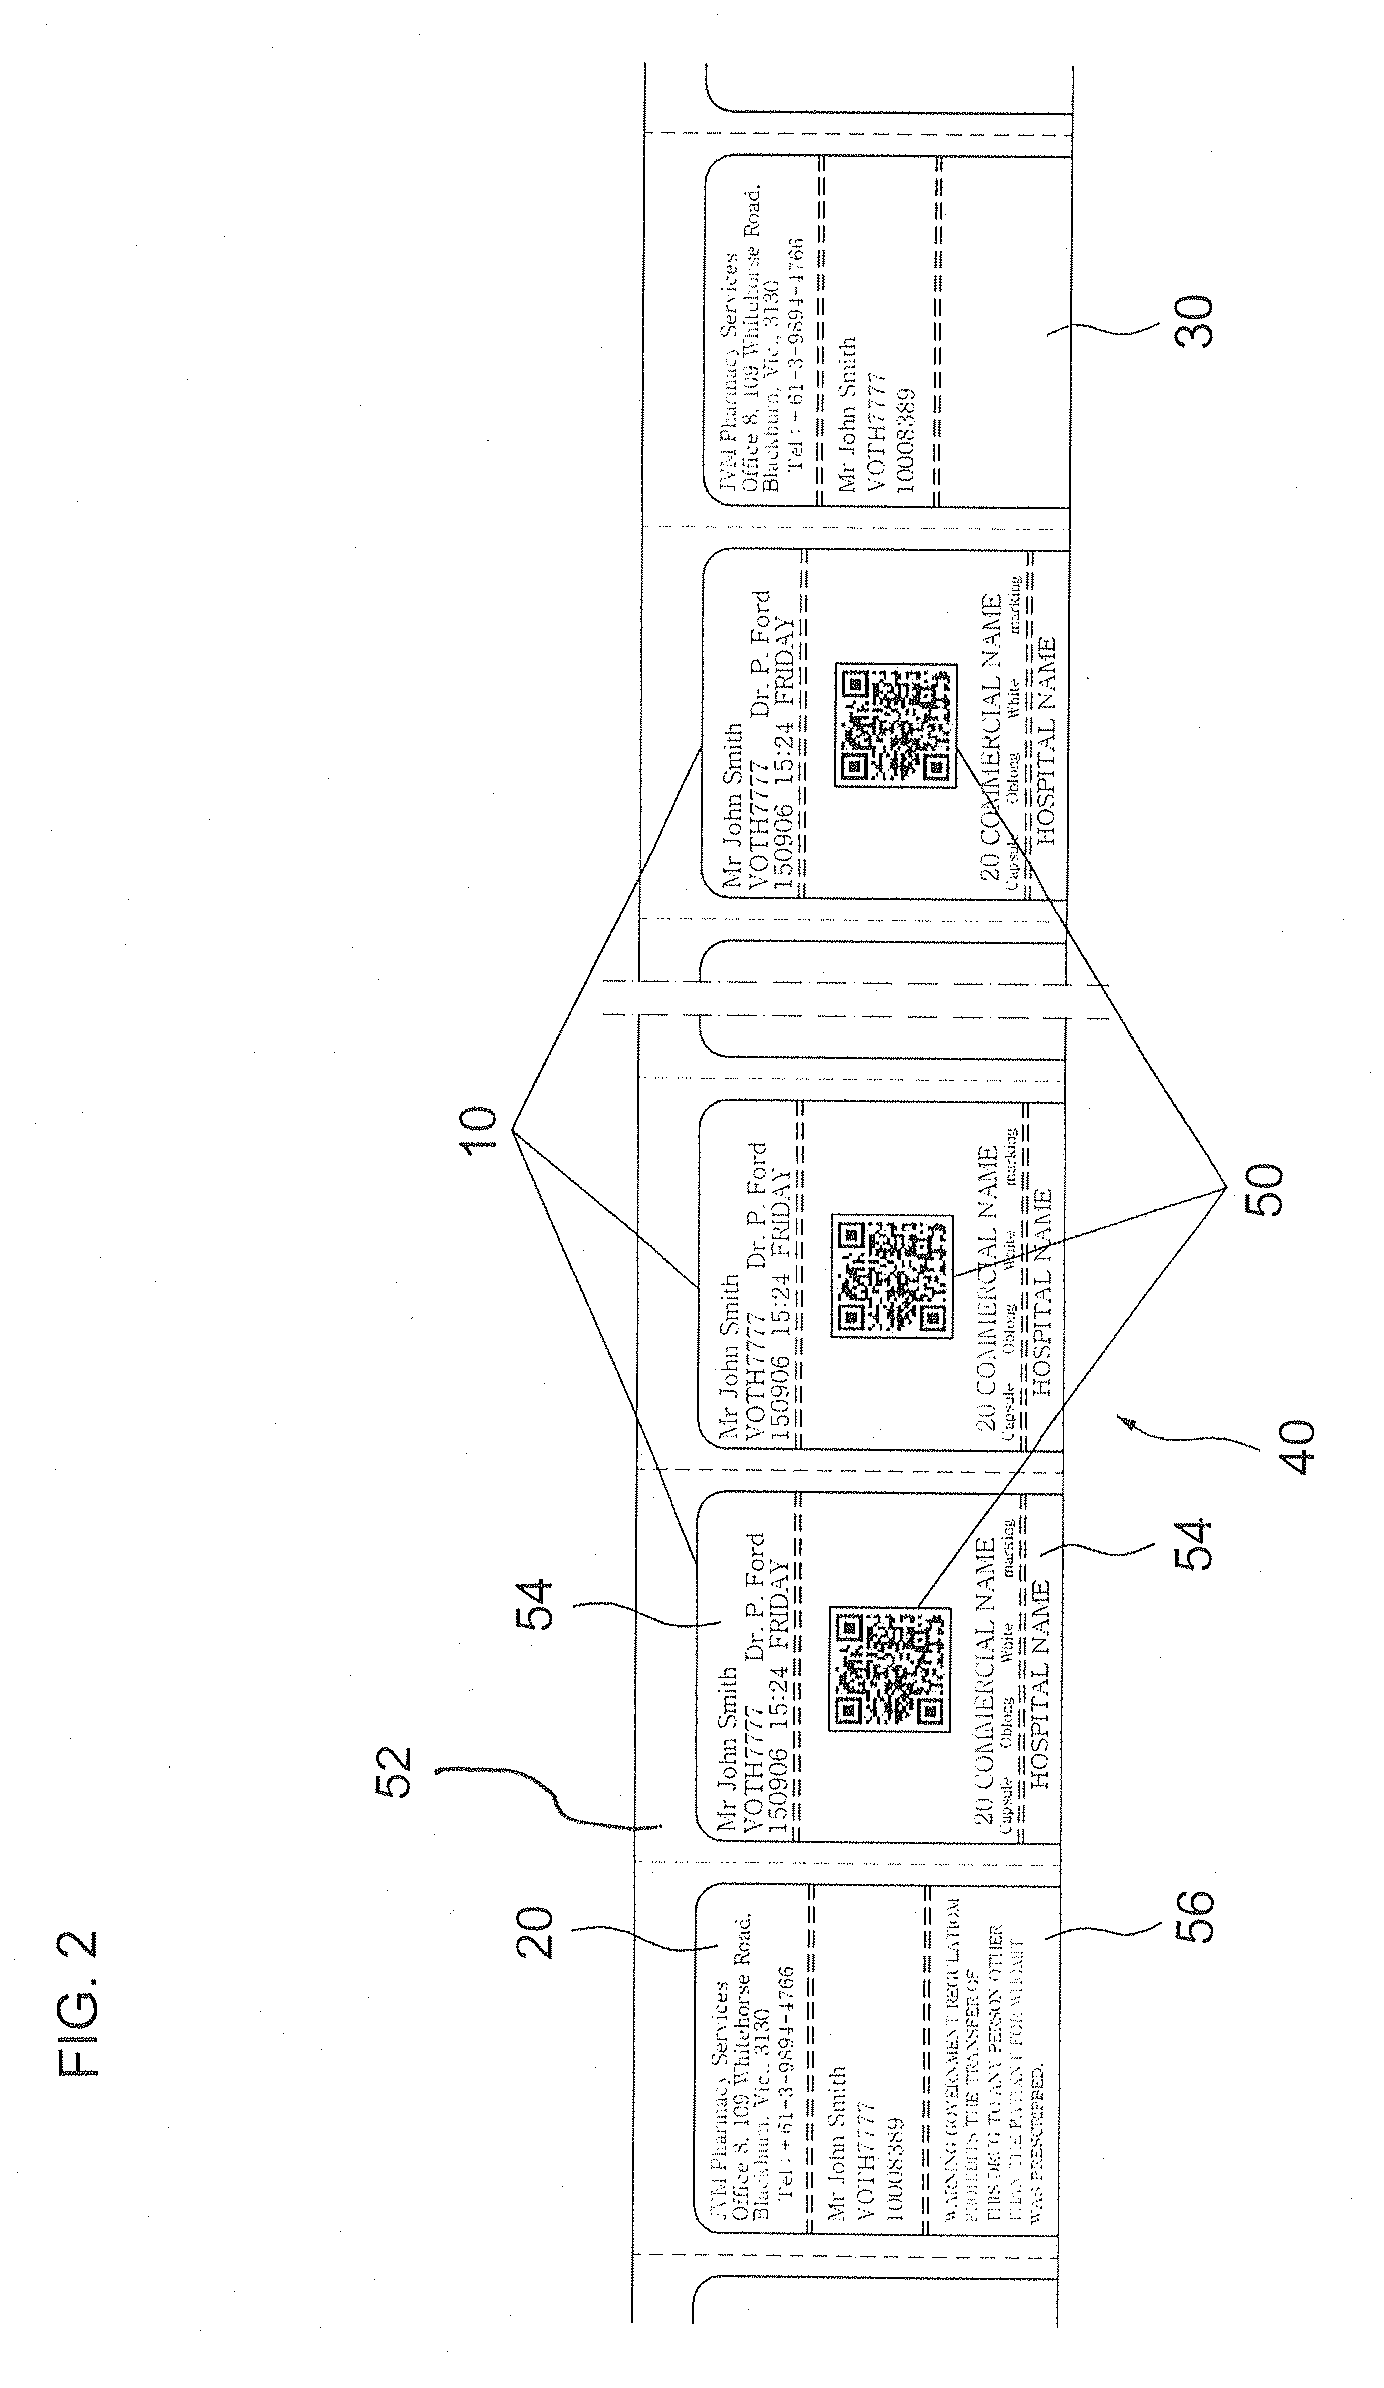 Packing envelope printing method for automatic medicine packing machine